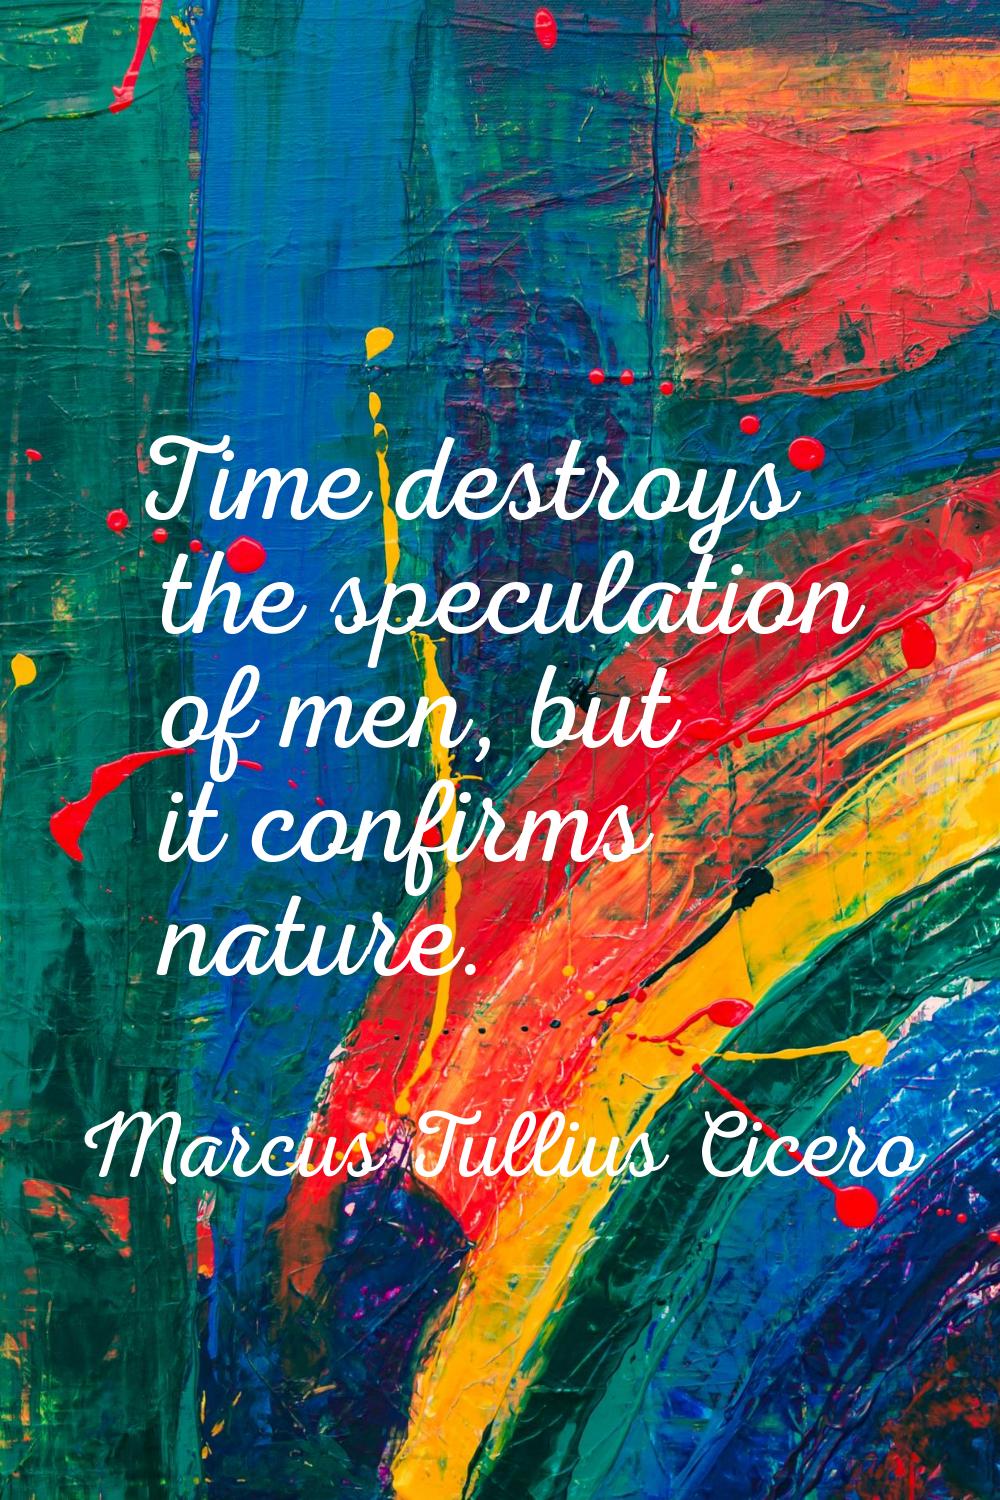 Time destroys the speculation of men, but it confirms nature.